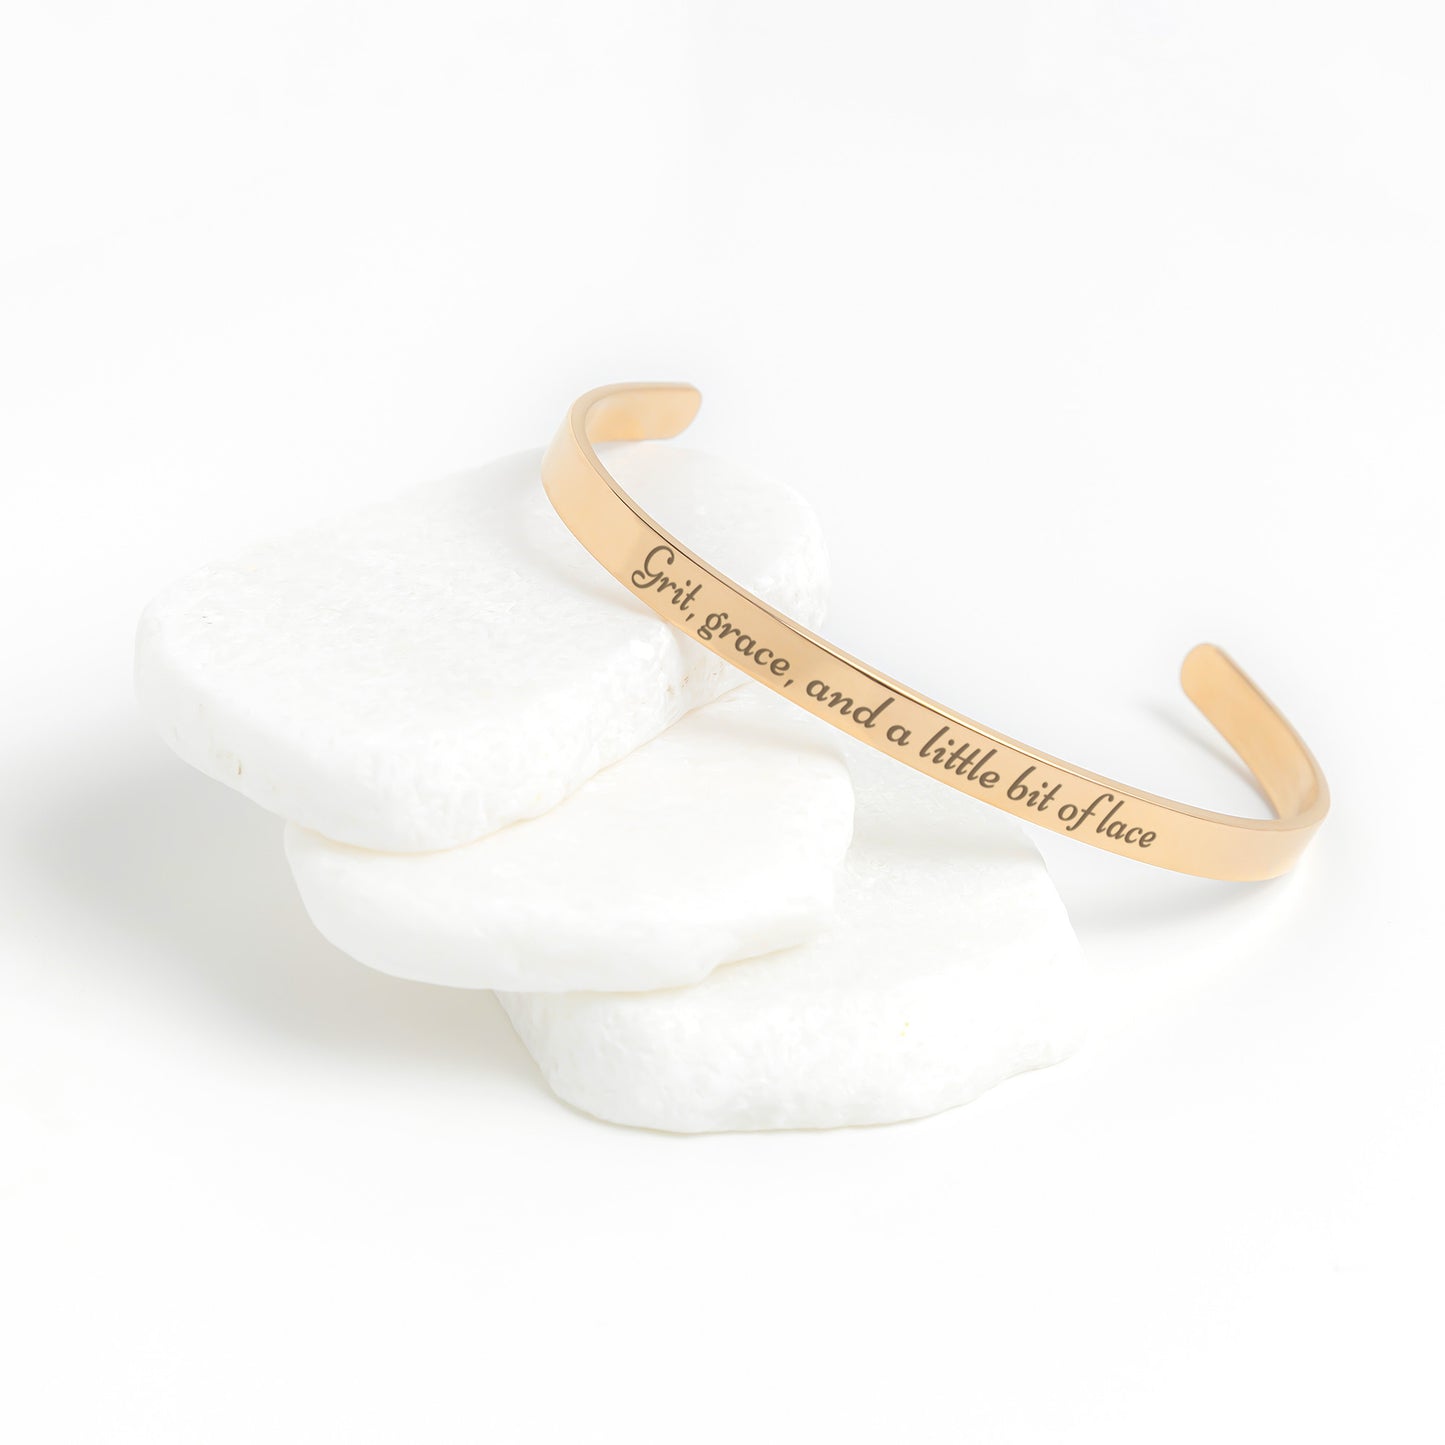 Grit, Grace, and a Little Bit Of Lace - Cuff Bracelet - FREE SHIPPING